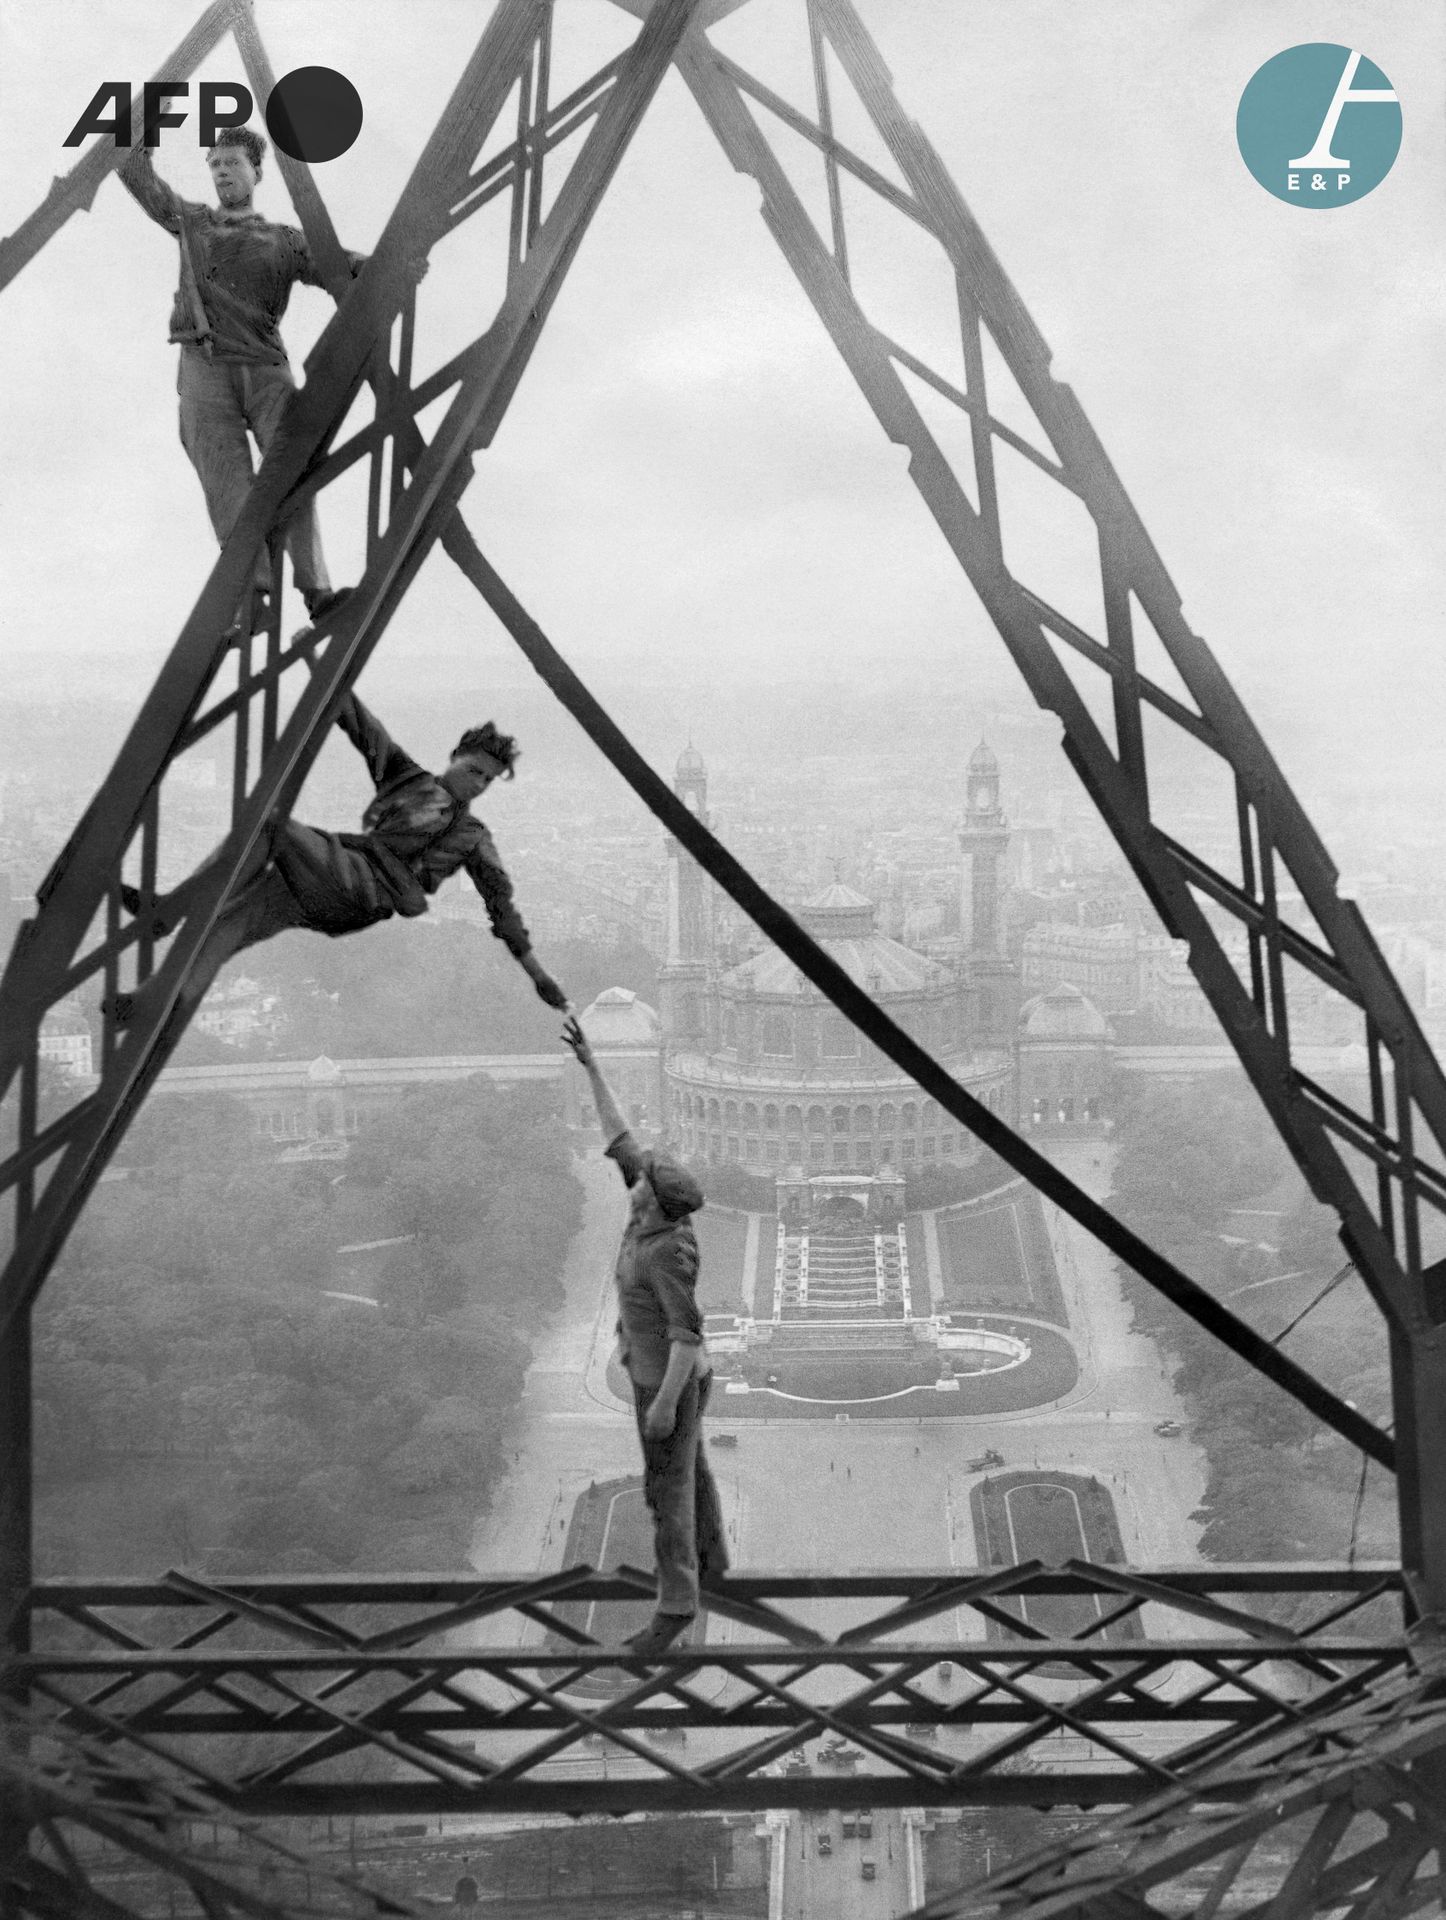 Null AFP

Acrobatic workers on the Eiffel Tower in front of the Trocadero Palace&hellip;